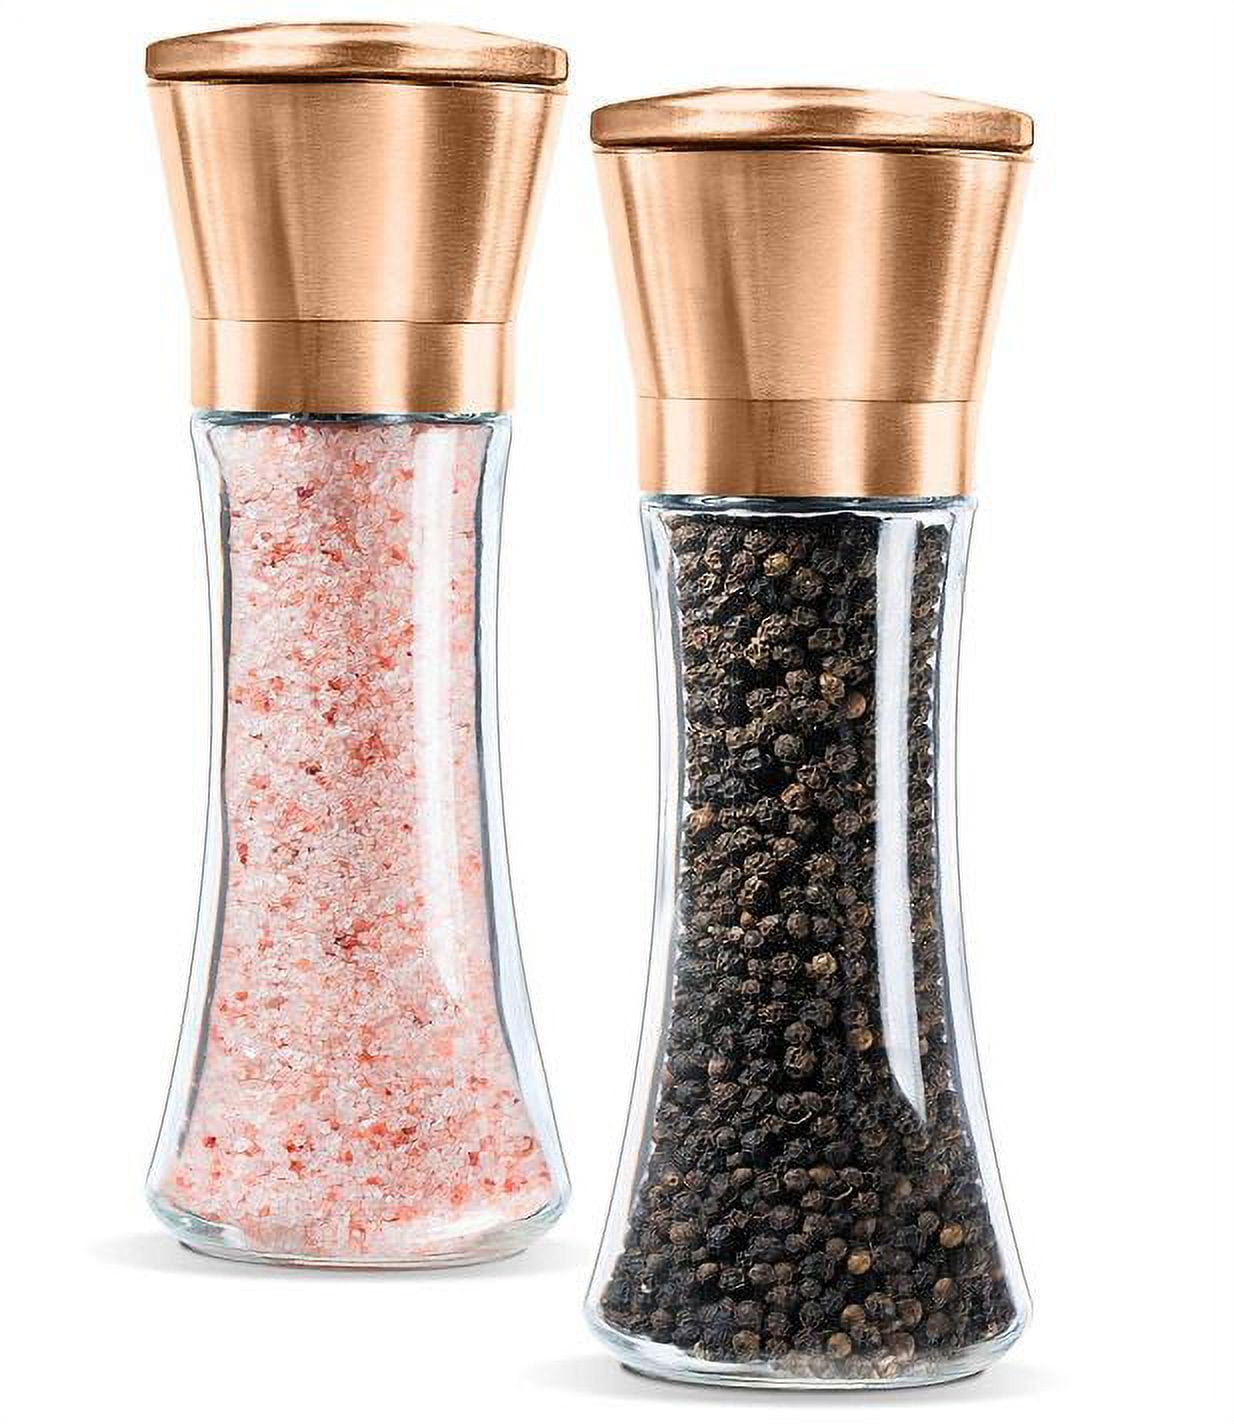 Luvan Pepper Grinder Mill, Heavy Duty Aluminum Manual Pepper Mill,  Professional Grade Pepper Grinder with Stainless Steel Blade and Adjustable